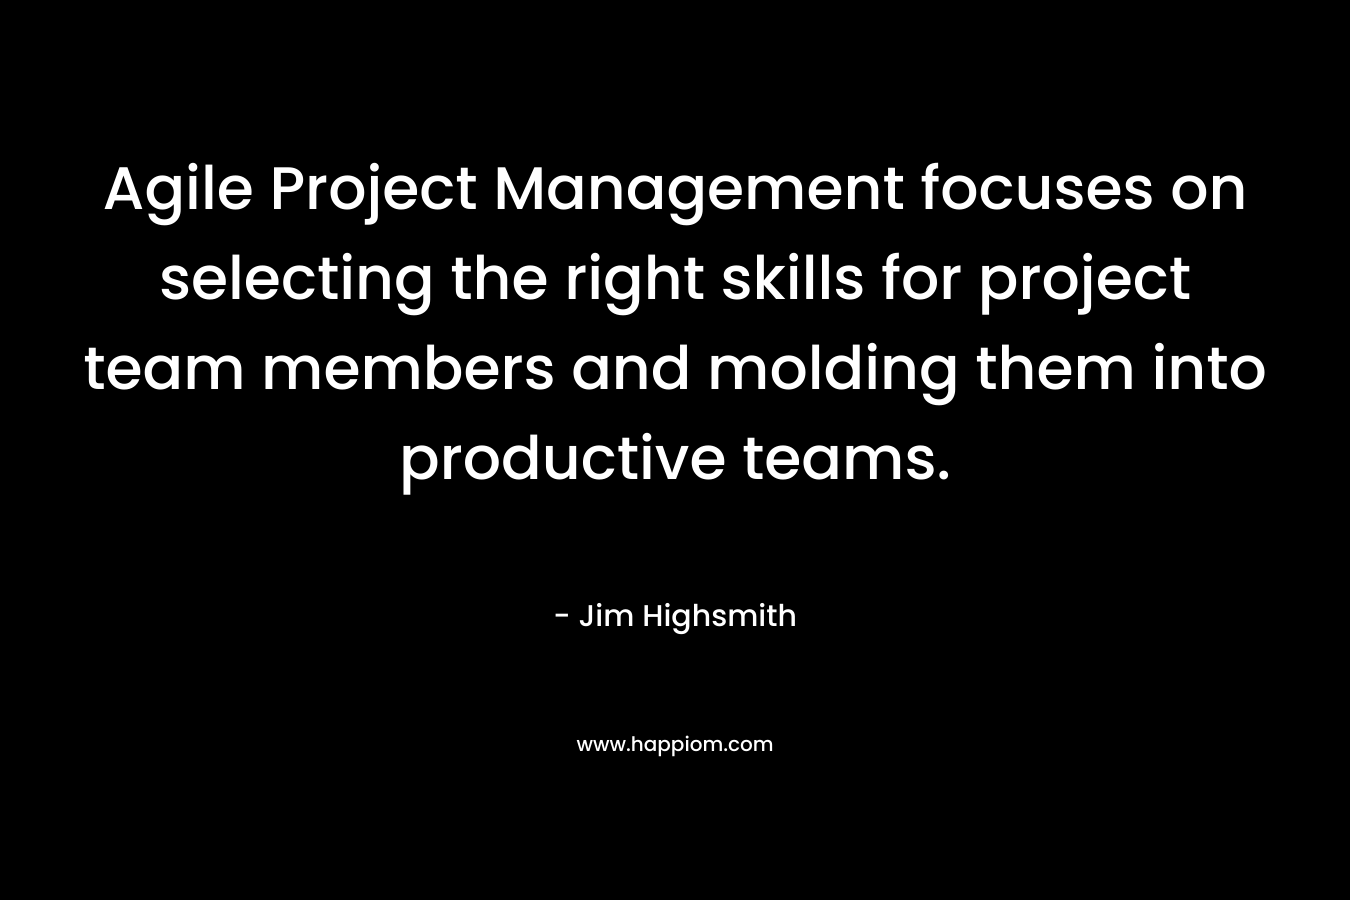 Agile Project Management focuses on selecting the right skills for project team members and molding them into productive teams. – Jim Highsmith